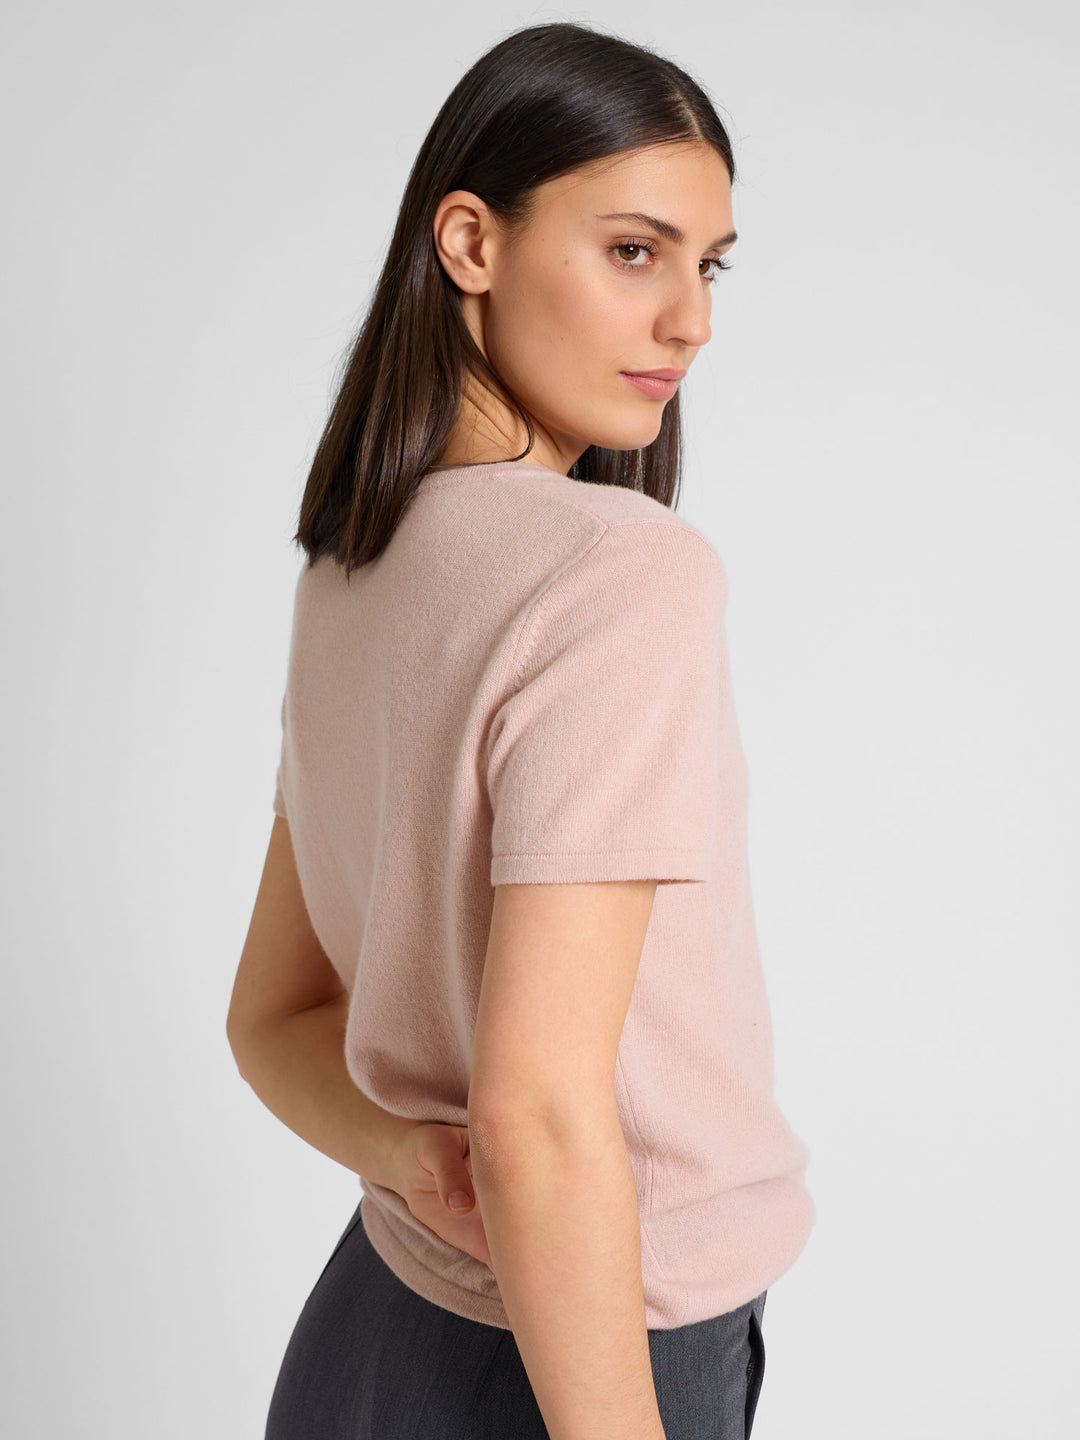 cashmere t-shirt tee shirt sustainable fashion luxury quality norwegian design. Color: Rose Glow.